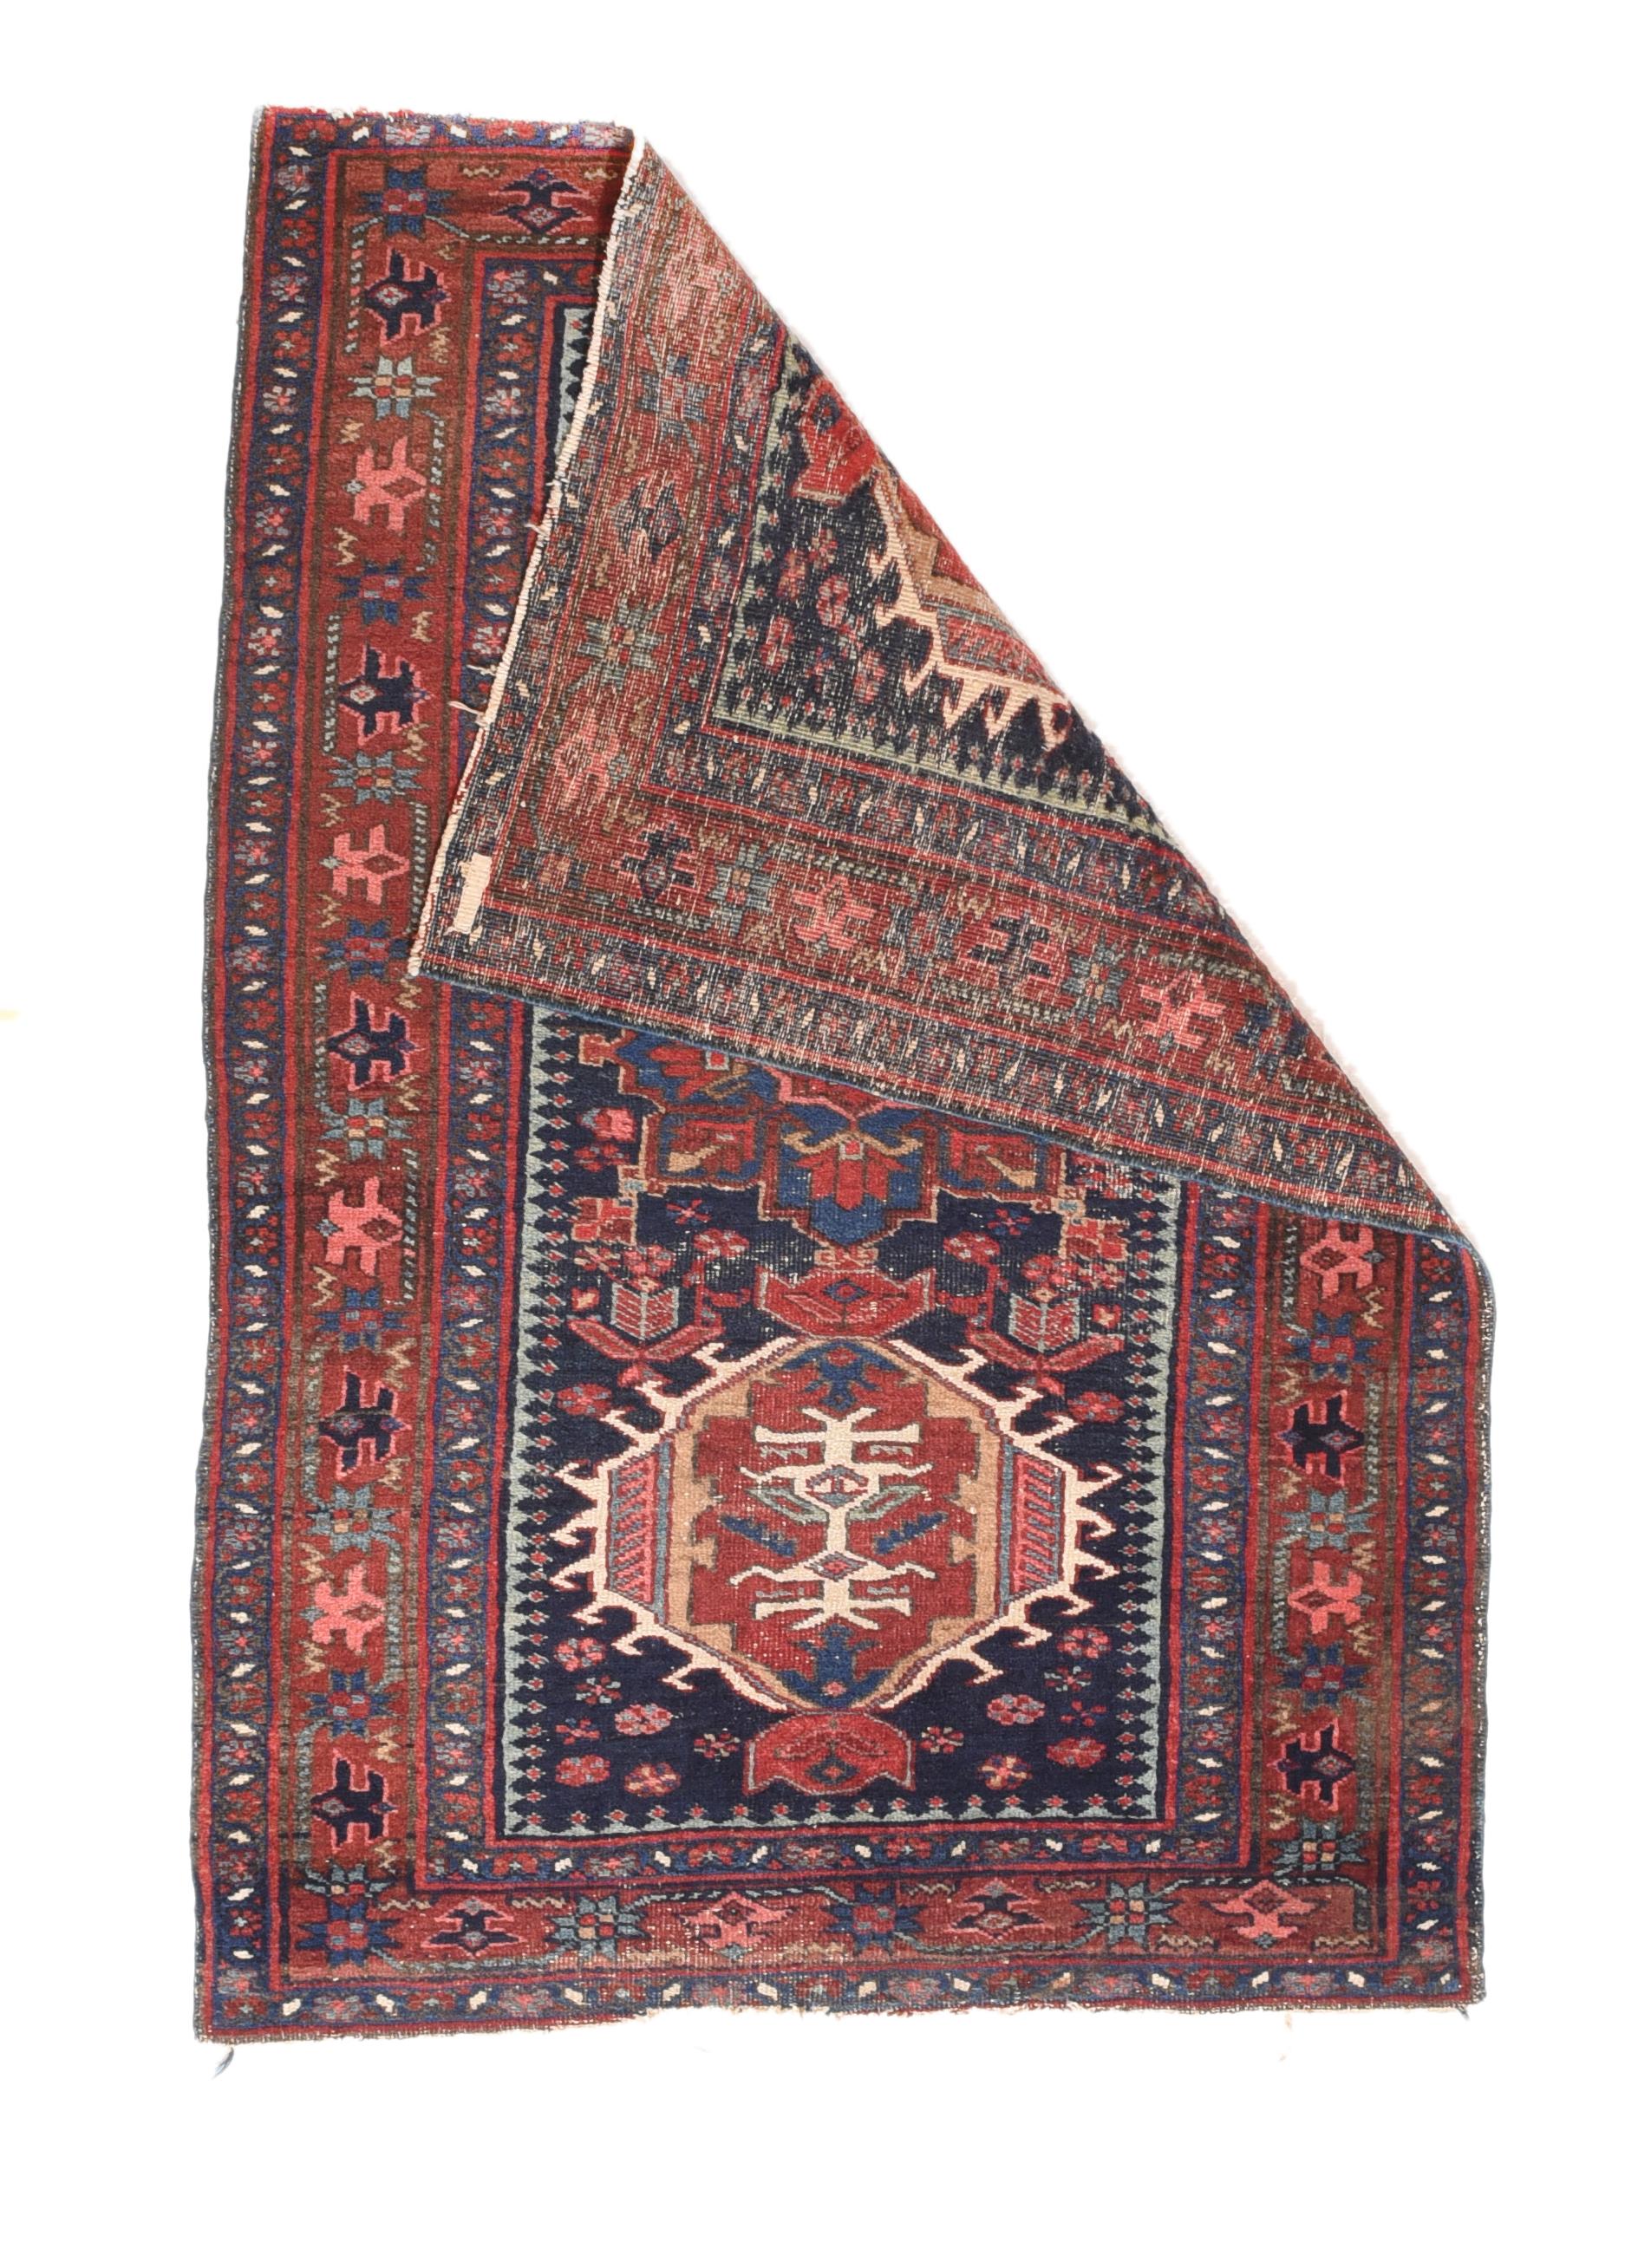 NW Persian village scatter of moderate weave with a navy field and three characteristic medallions in a pole layout, either ivory hooked hexagons or red octogramme. Red border of simplified reversing palmettes and associated stars. Light blue